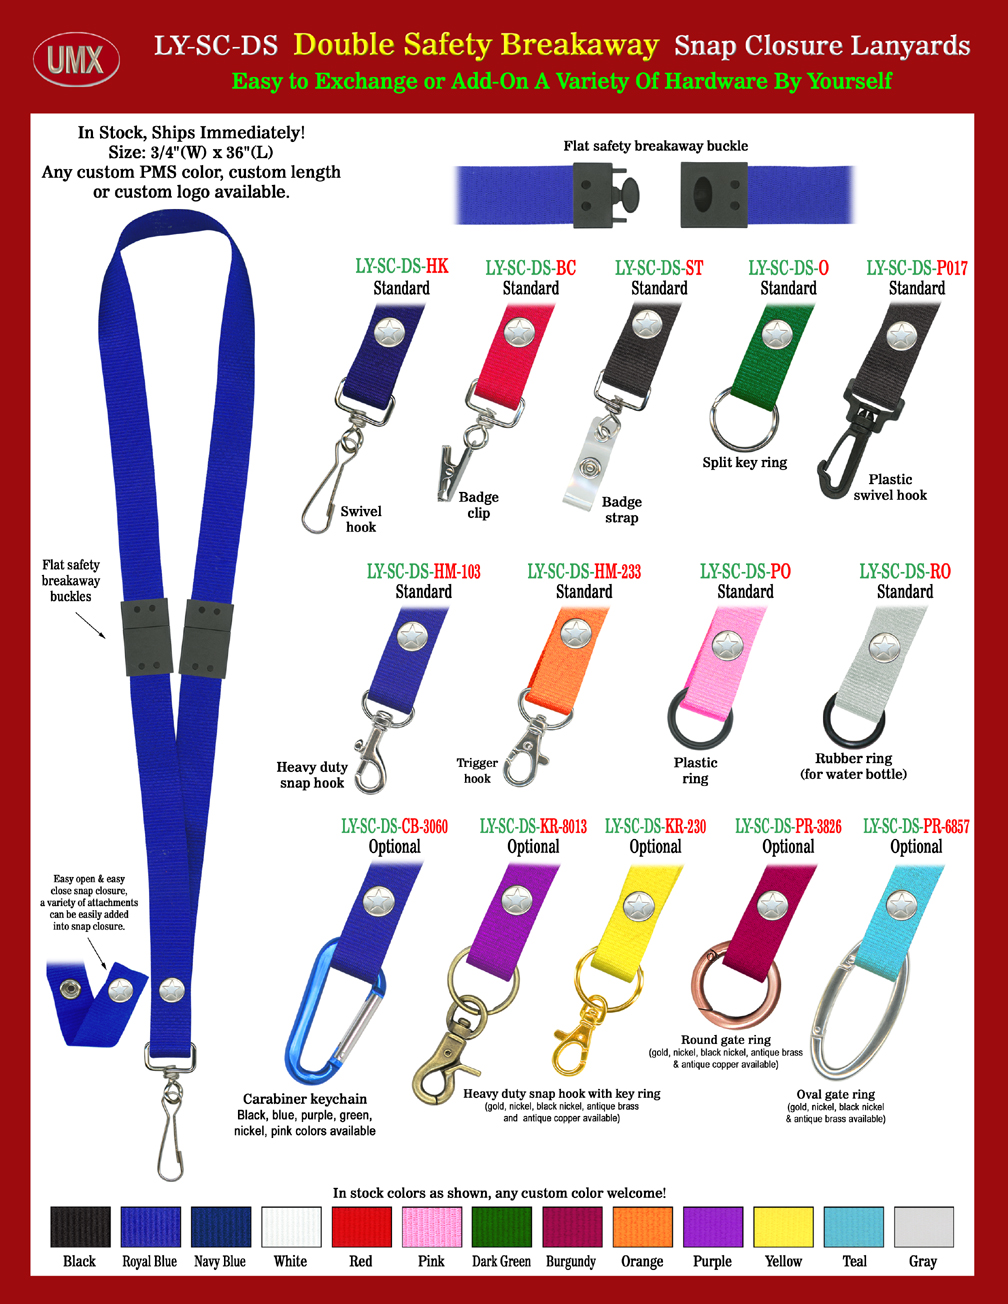 Double Safety Snap-Button Lanyards With Two Safety Breakaway